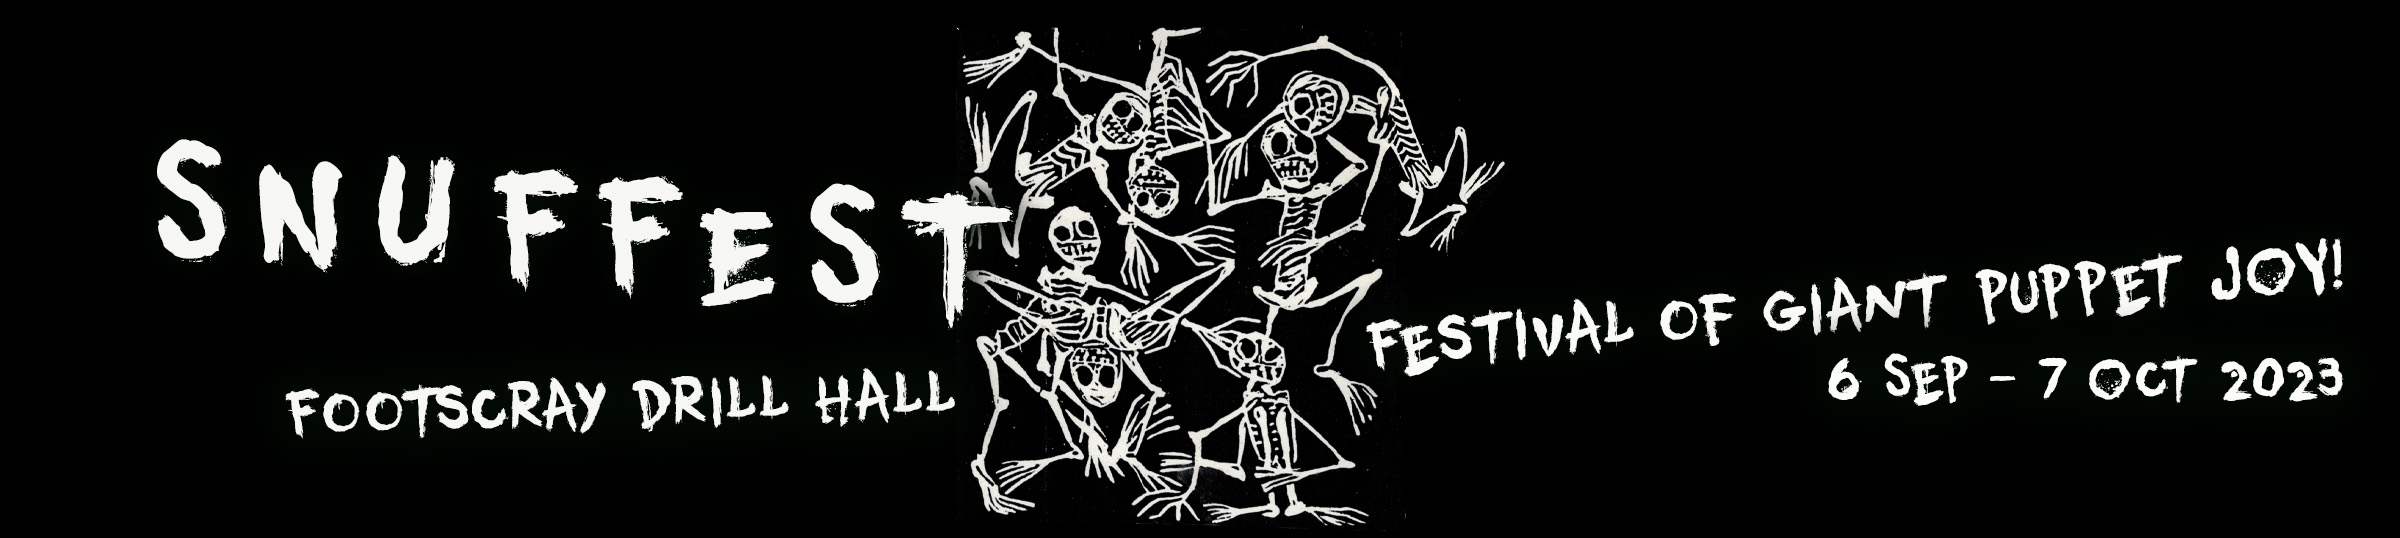 Snuffest banner reads: Festival of giant puppet shows, 6 sep - 7 oct 2023, Footscray Drill Hall